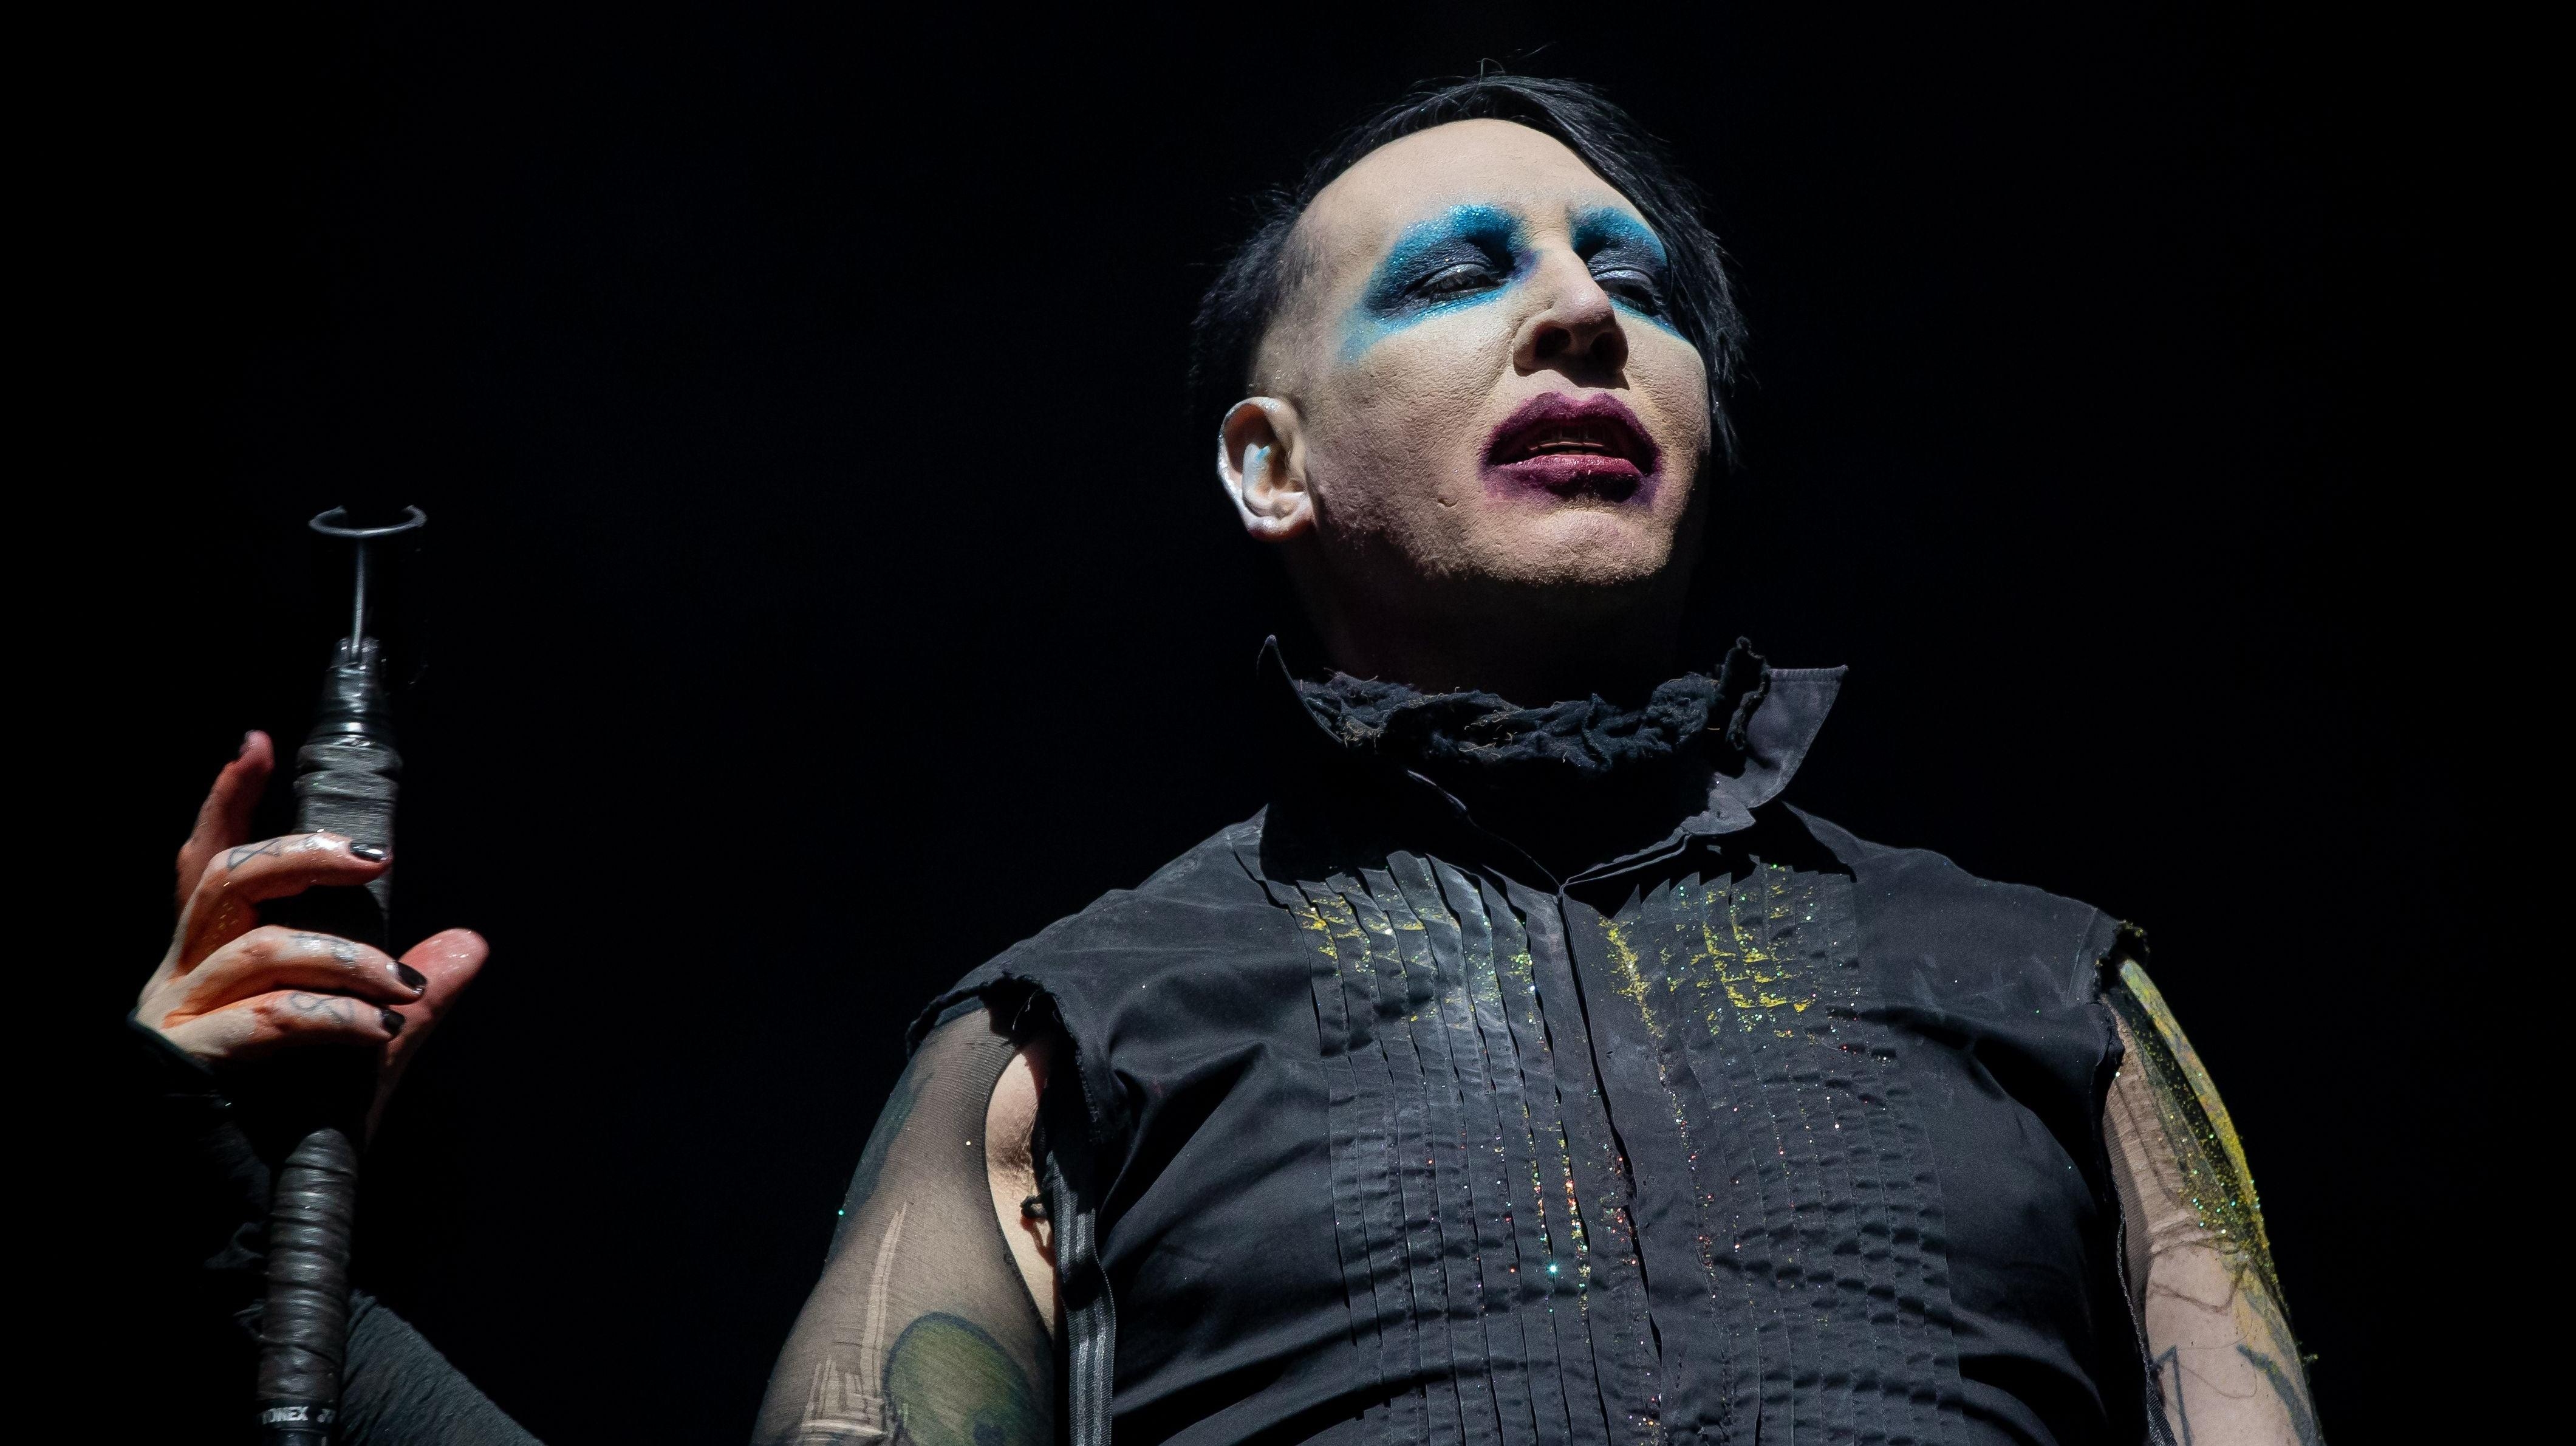 Warrant issued for Marilyn Manson's arrest in connection with 2019 assault